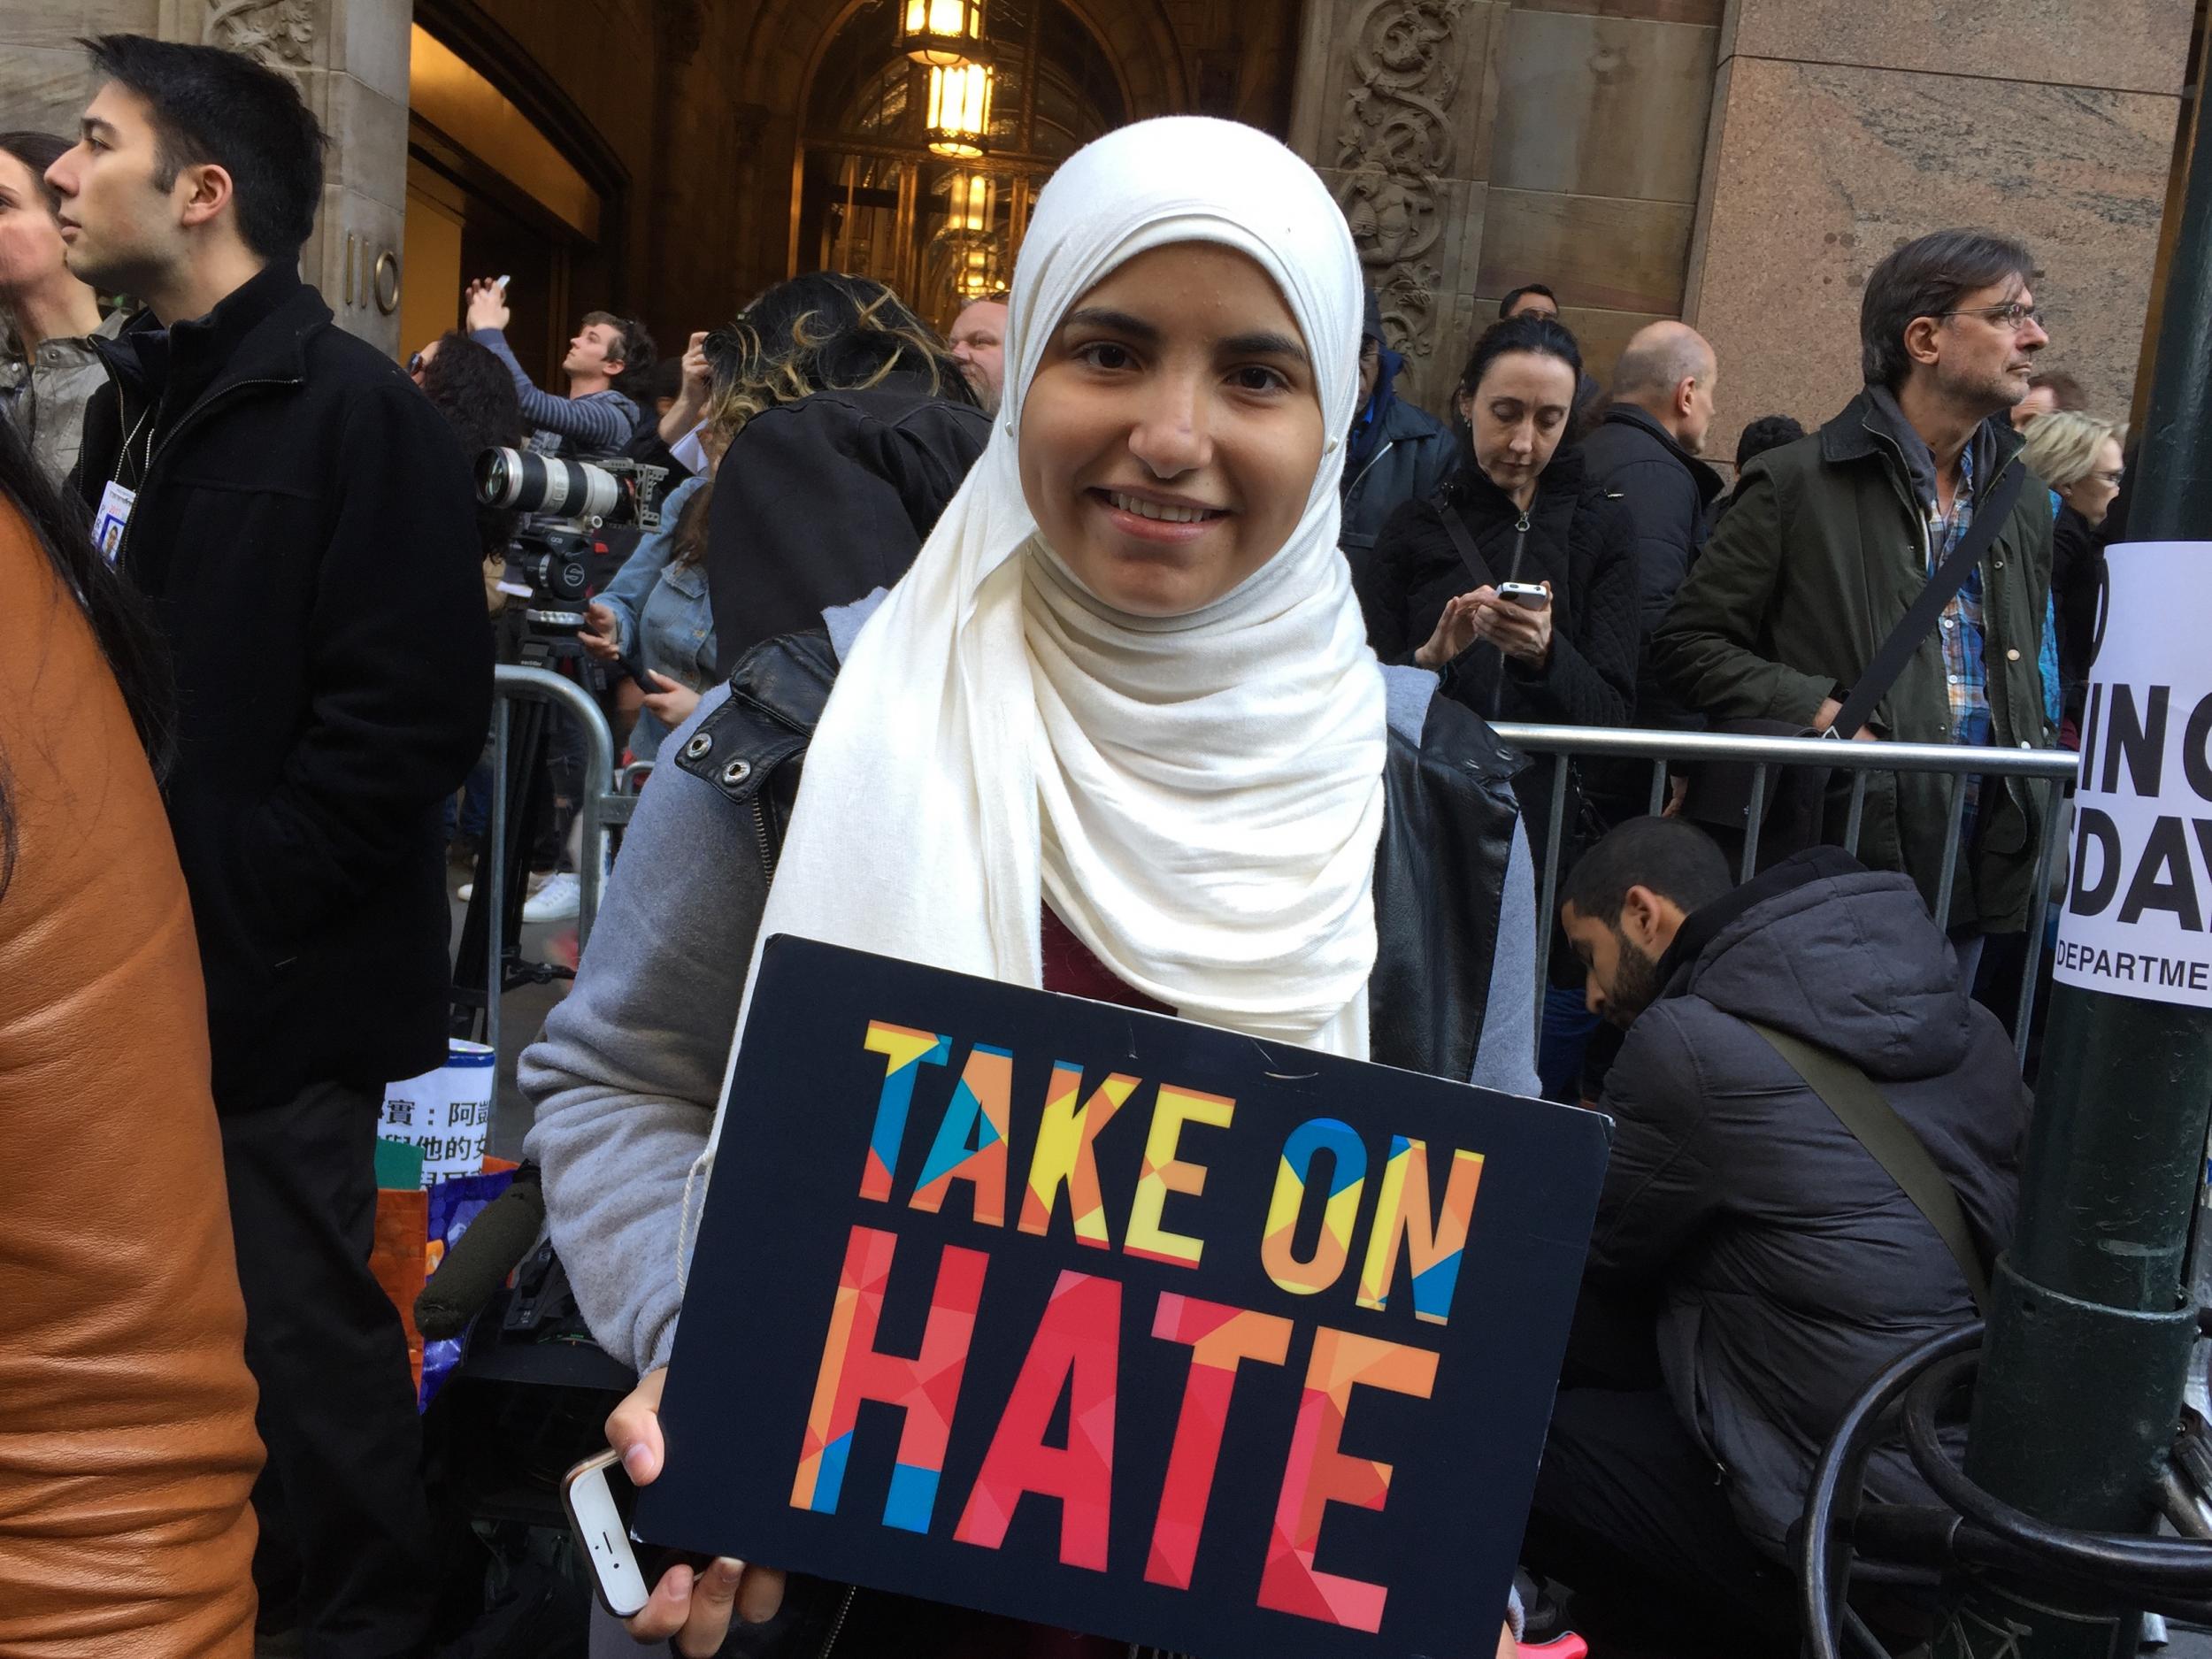 Salwa Mozzed said it was important to fight against hatred